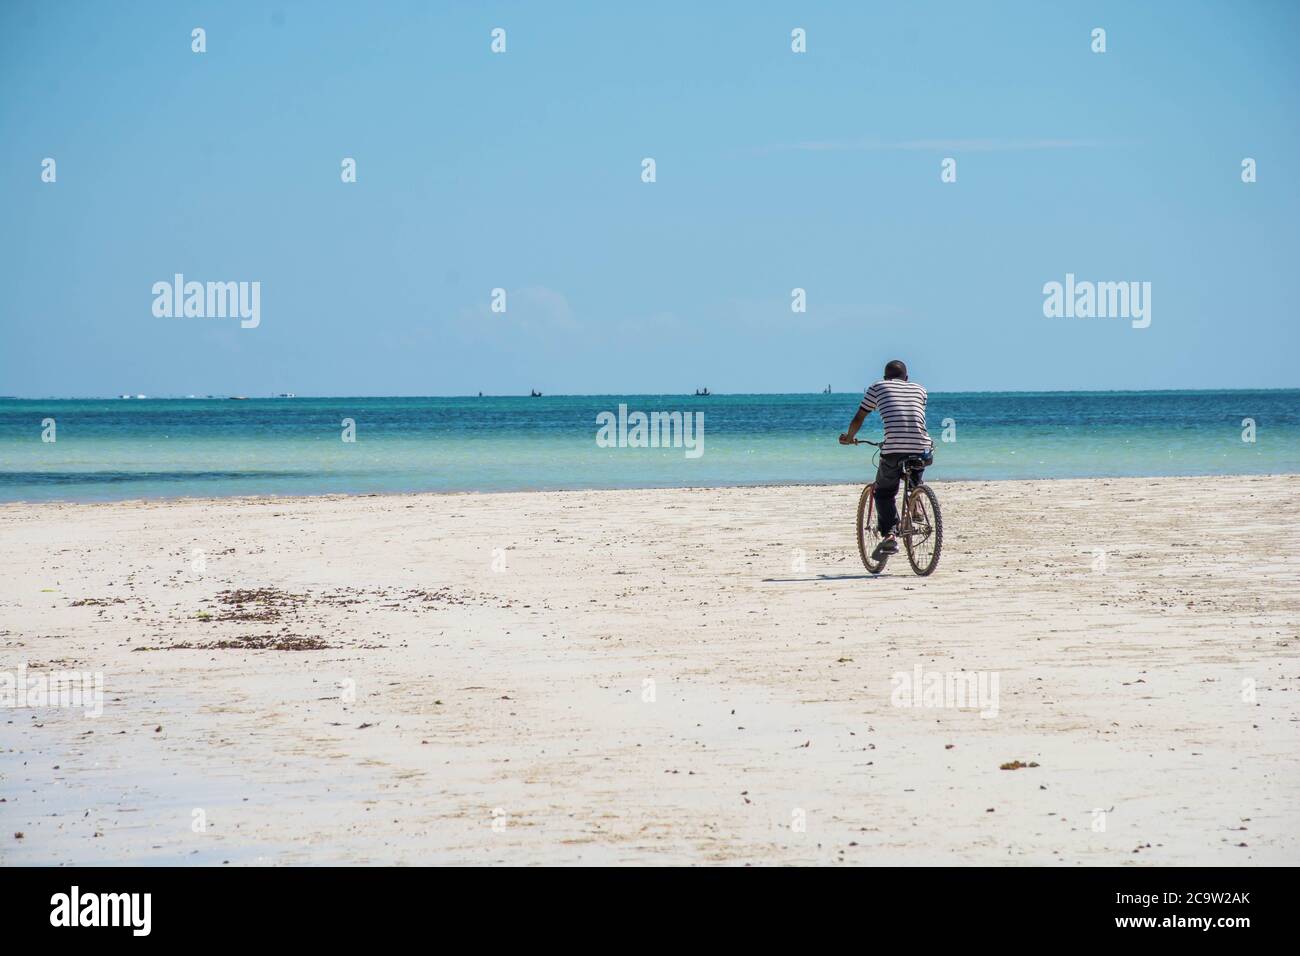 Man riding on a bike at the diani beach in Kenya. Beautiful view on ocean. Stock Photo